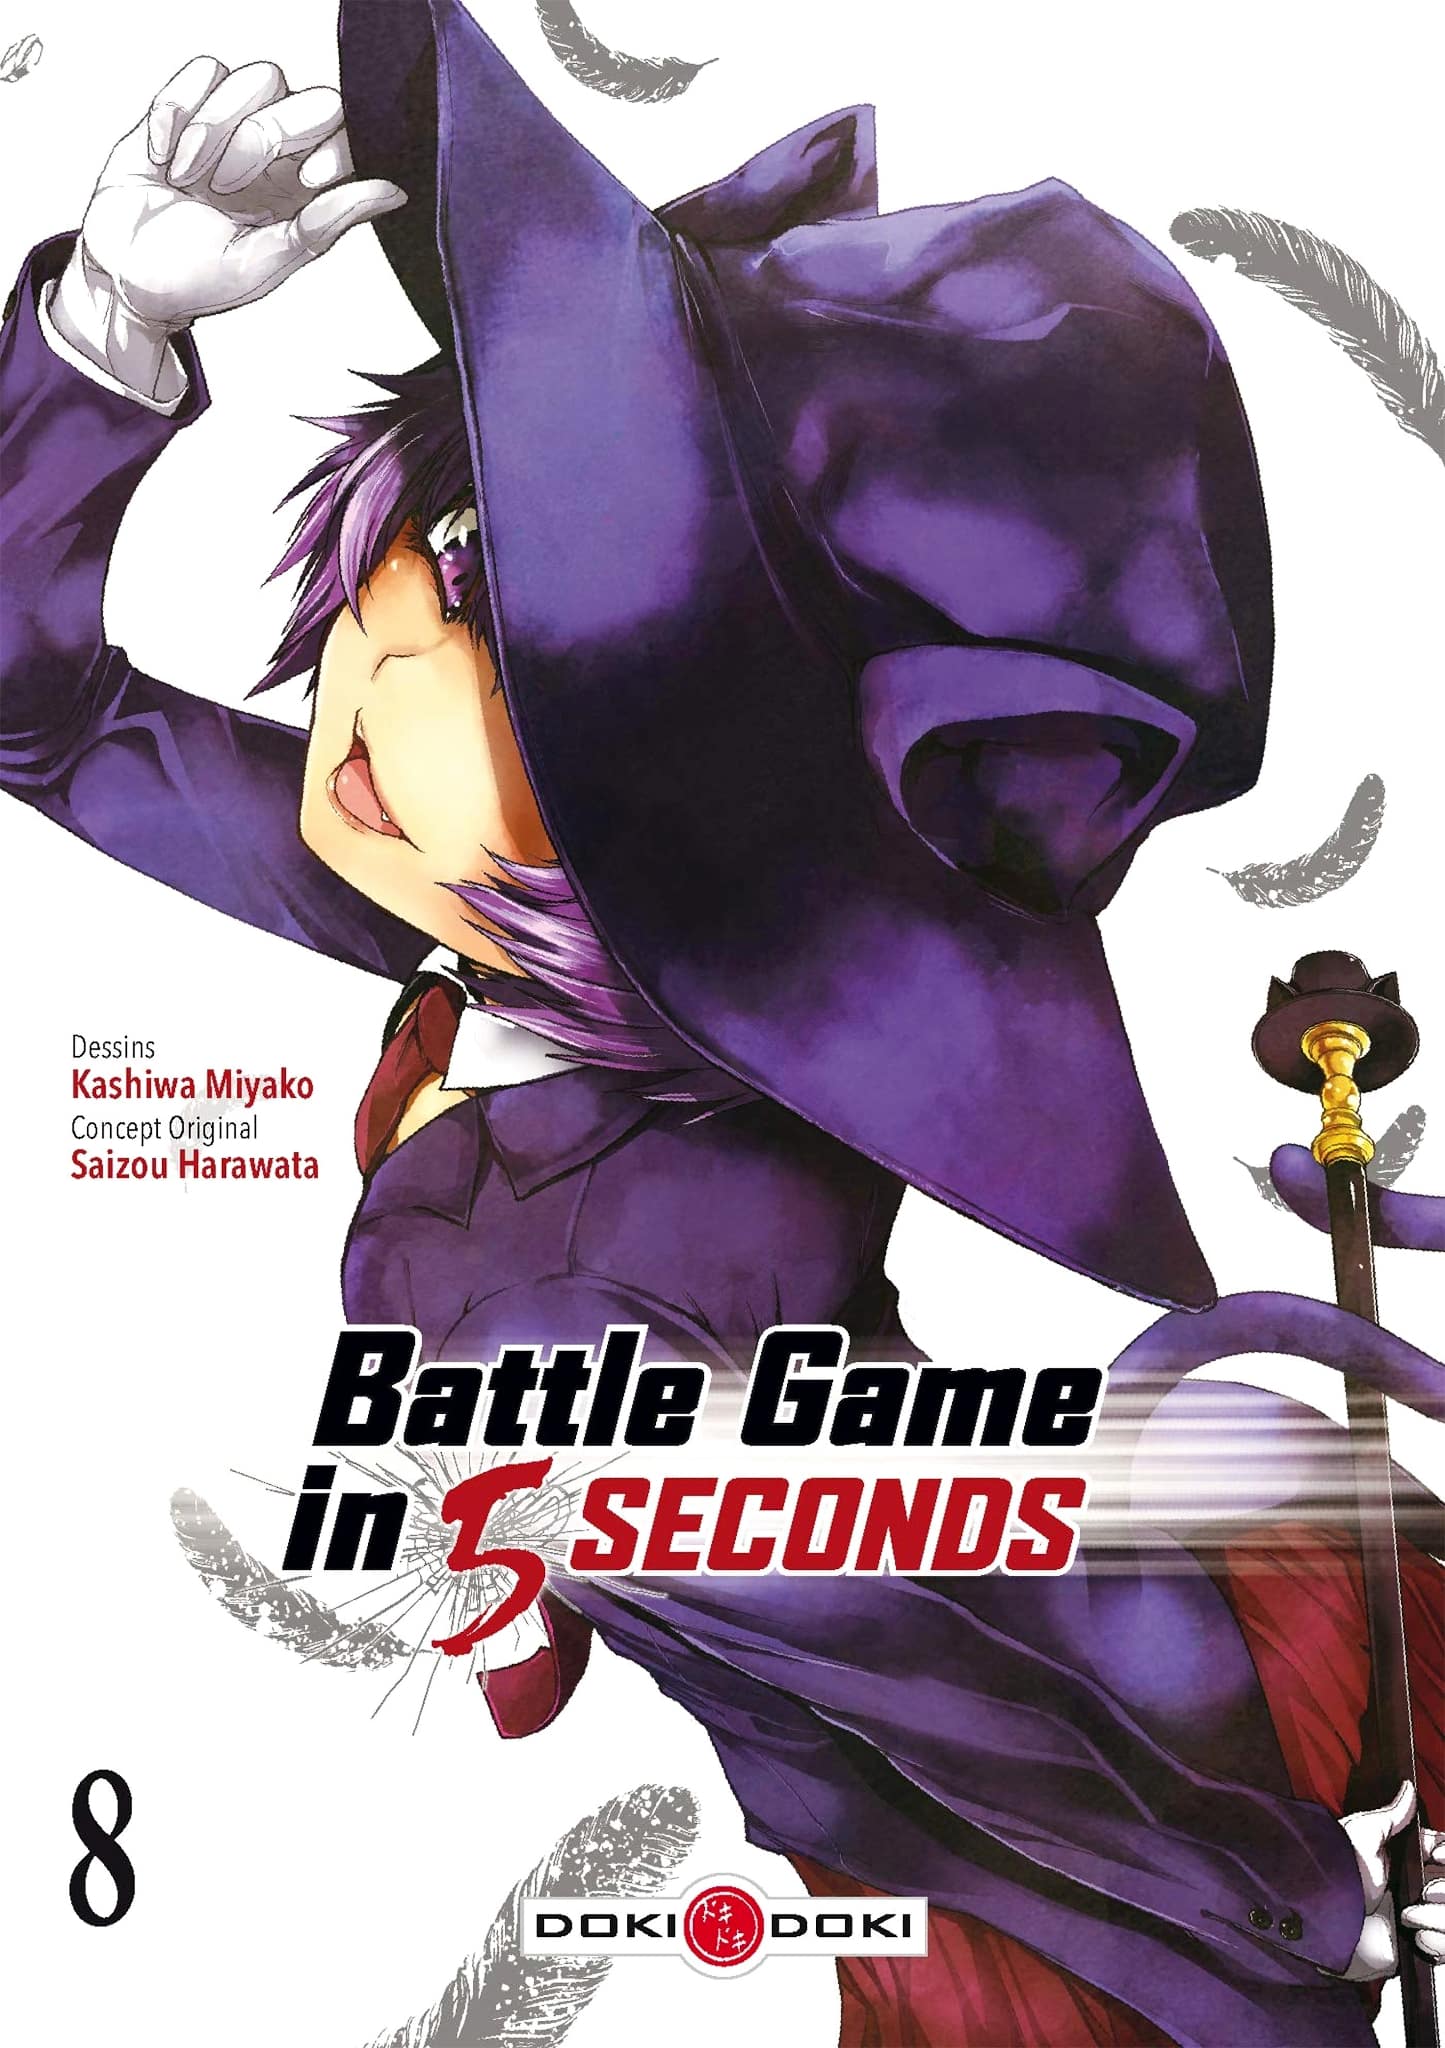 Tome 8 du manga Battle Game in 5 Seconds